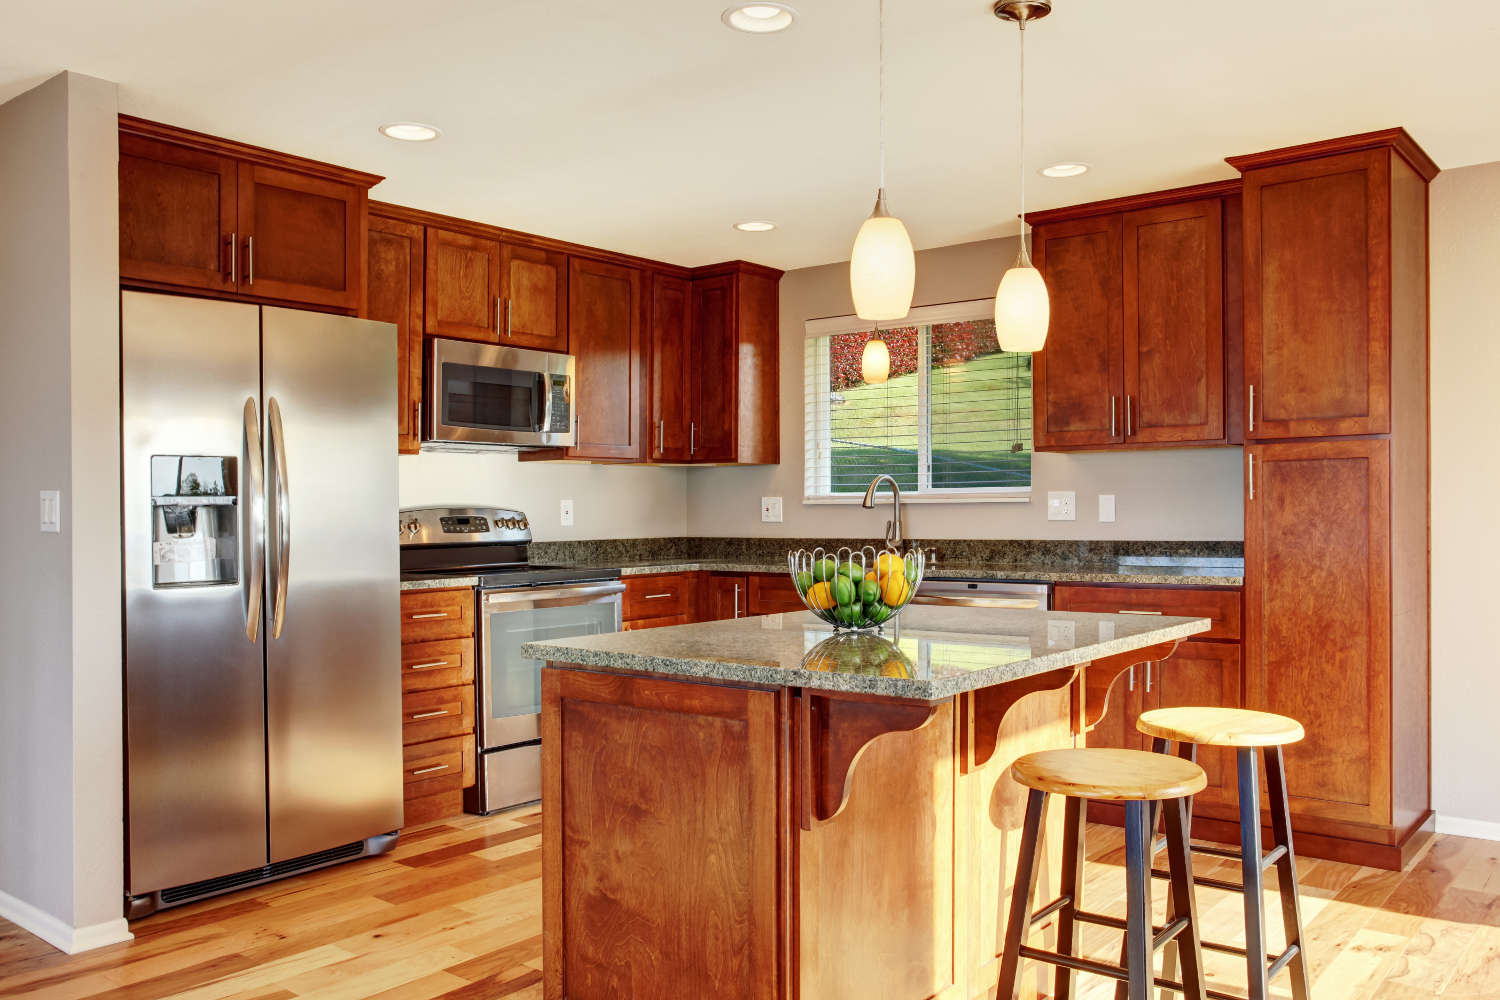 Thinking about a new kitchen? Here is what you need to know